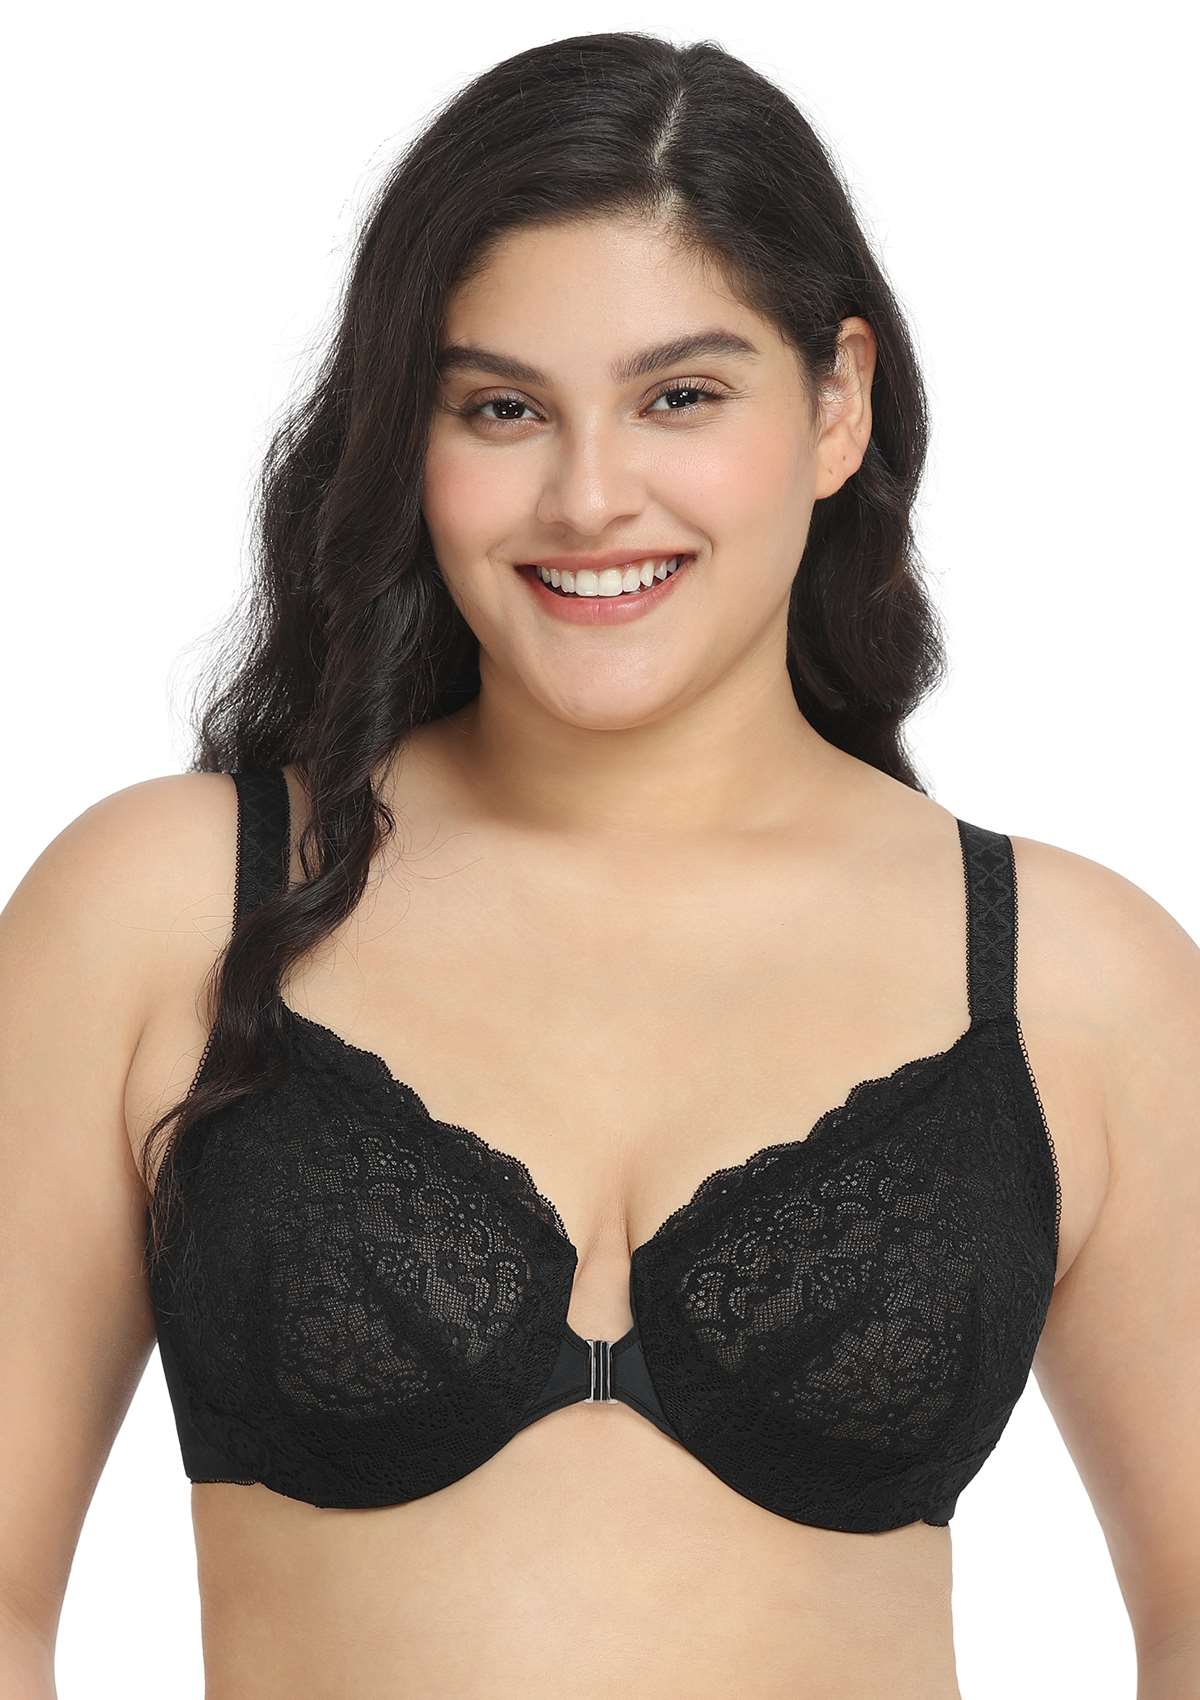 HSIA Nymphaea Front-Close Unlined Retro Floral Lace Back Smoothing Bra - Black / 34 / DD/E